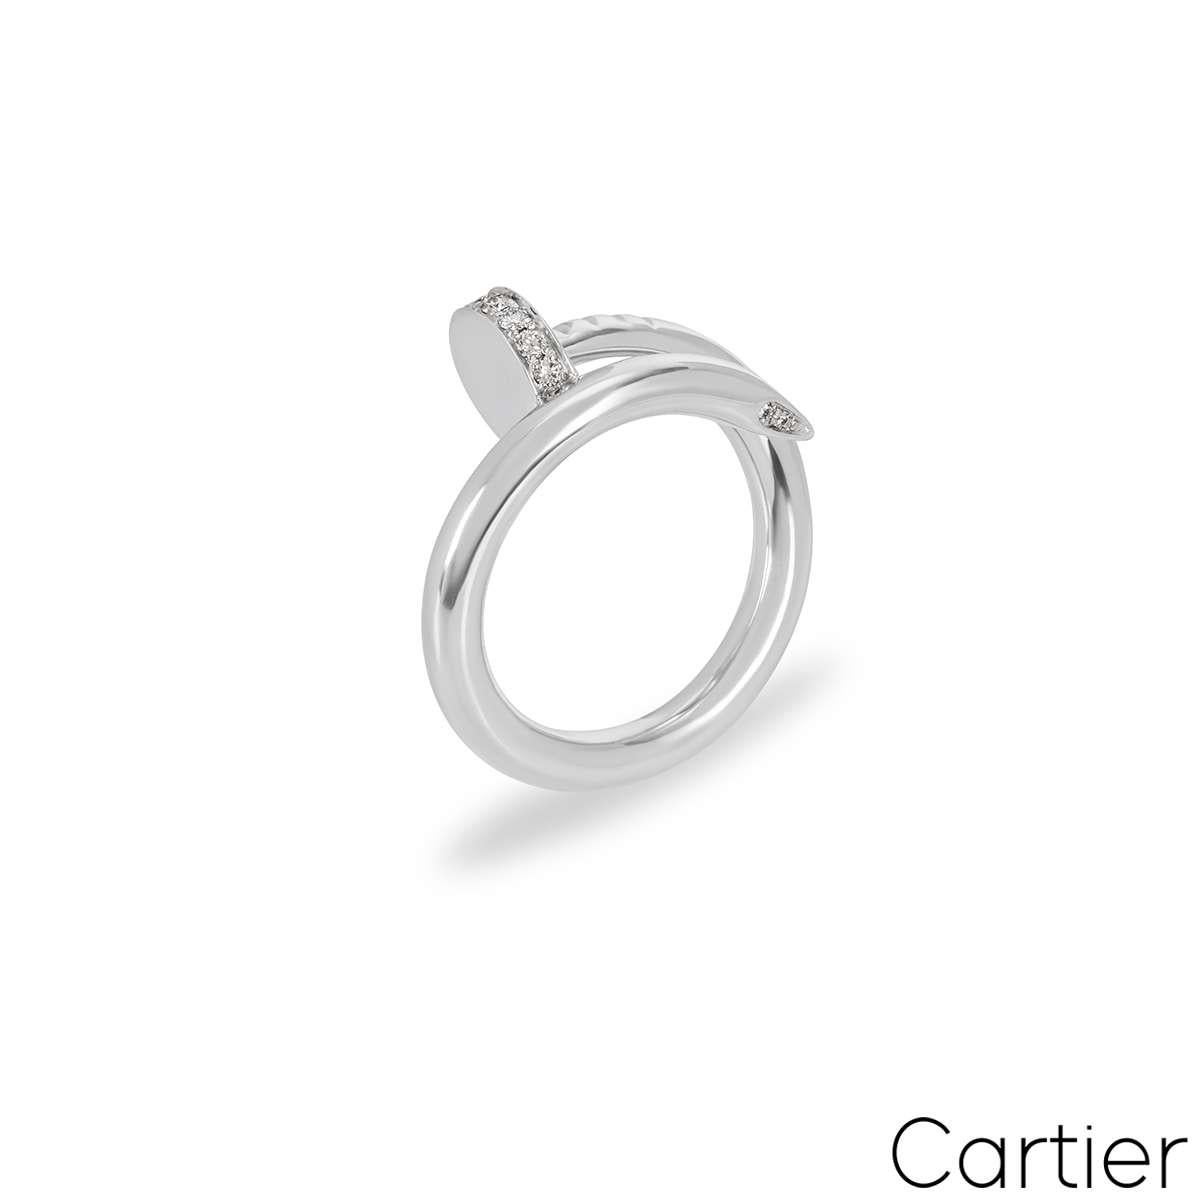 An 18k white gold diamond ring by Cartier from the Juste un Clou collection. The ring is in the style of a nail and has 22 round brilliant cut diamonds set in the head and tip with a total weight of 0.13ct. A size UK L - EU 51 and this ring has a